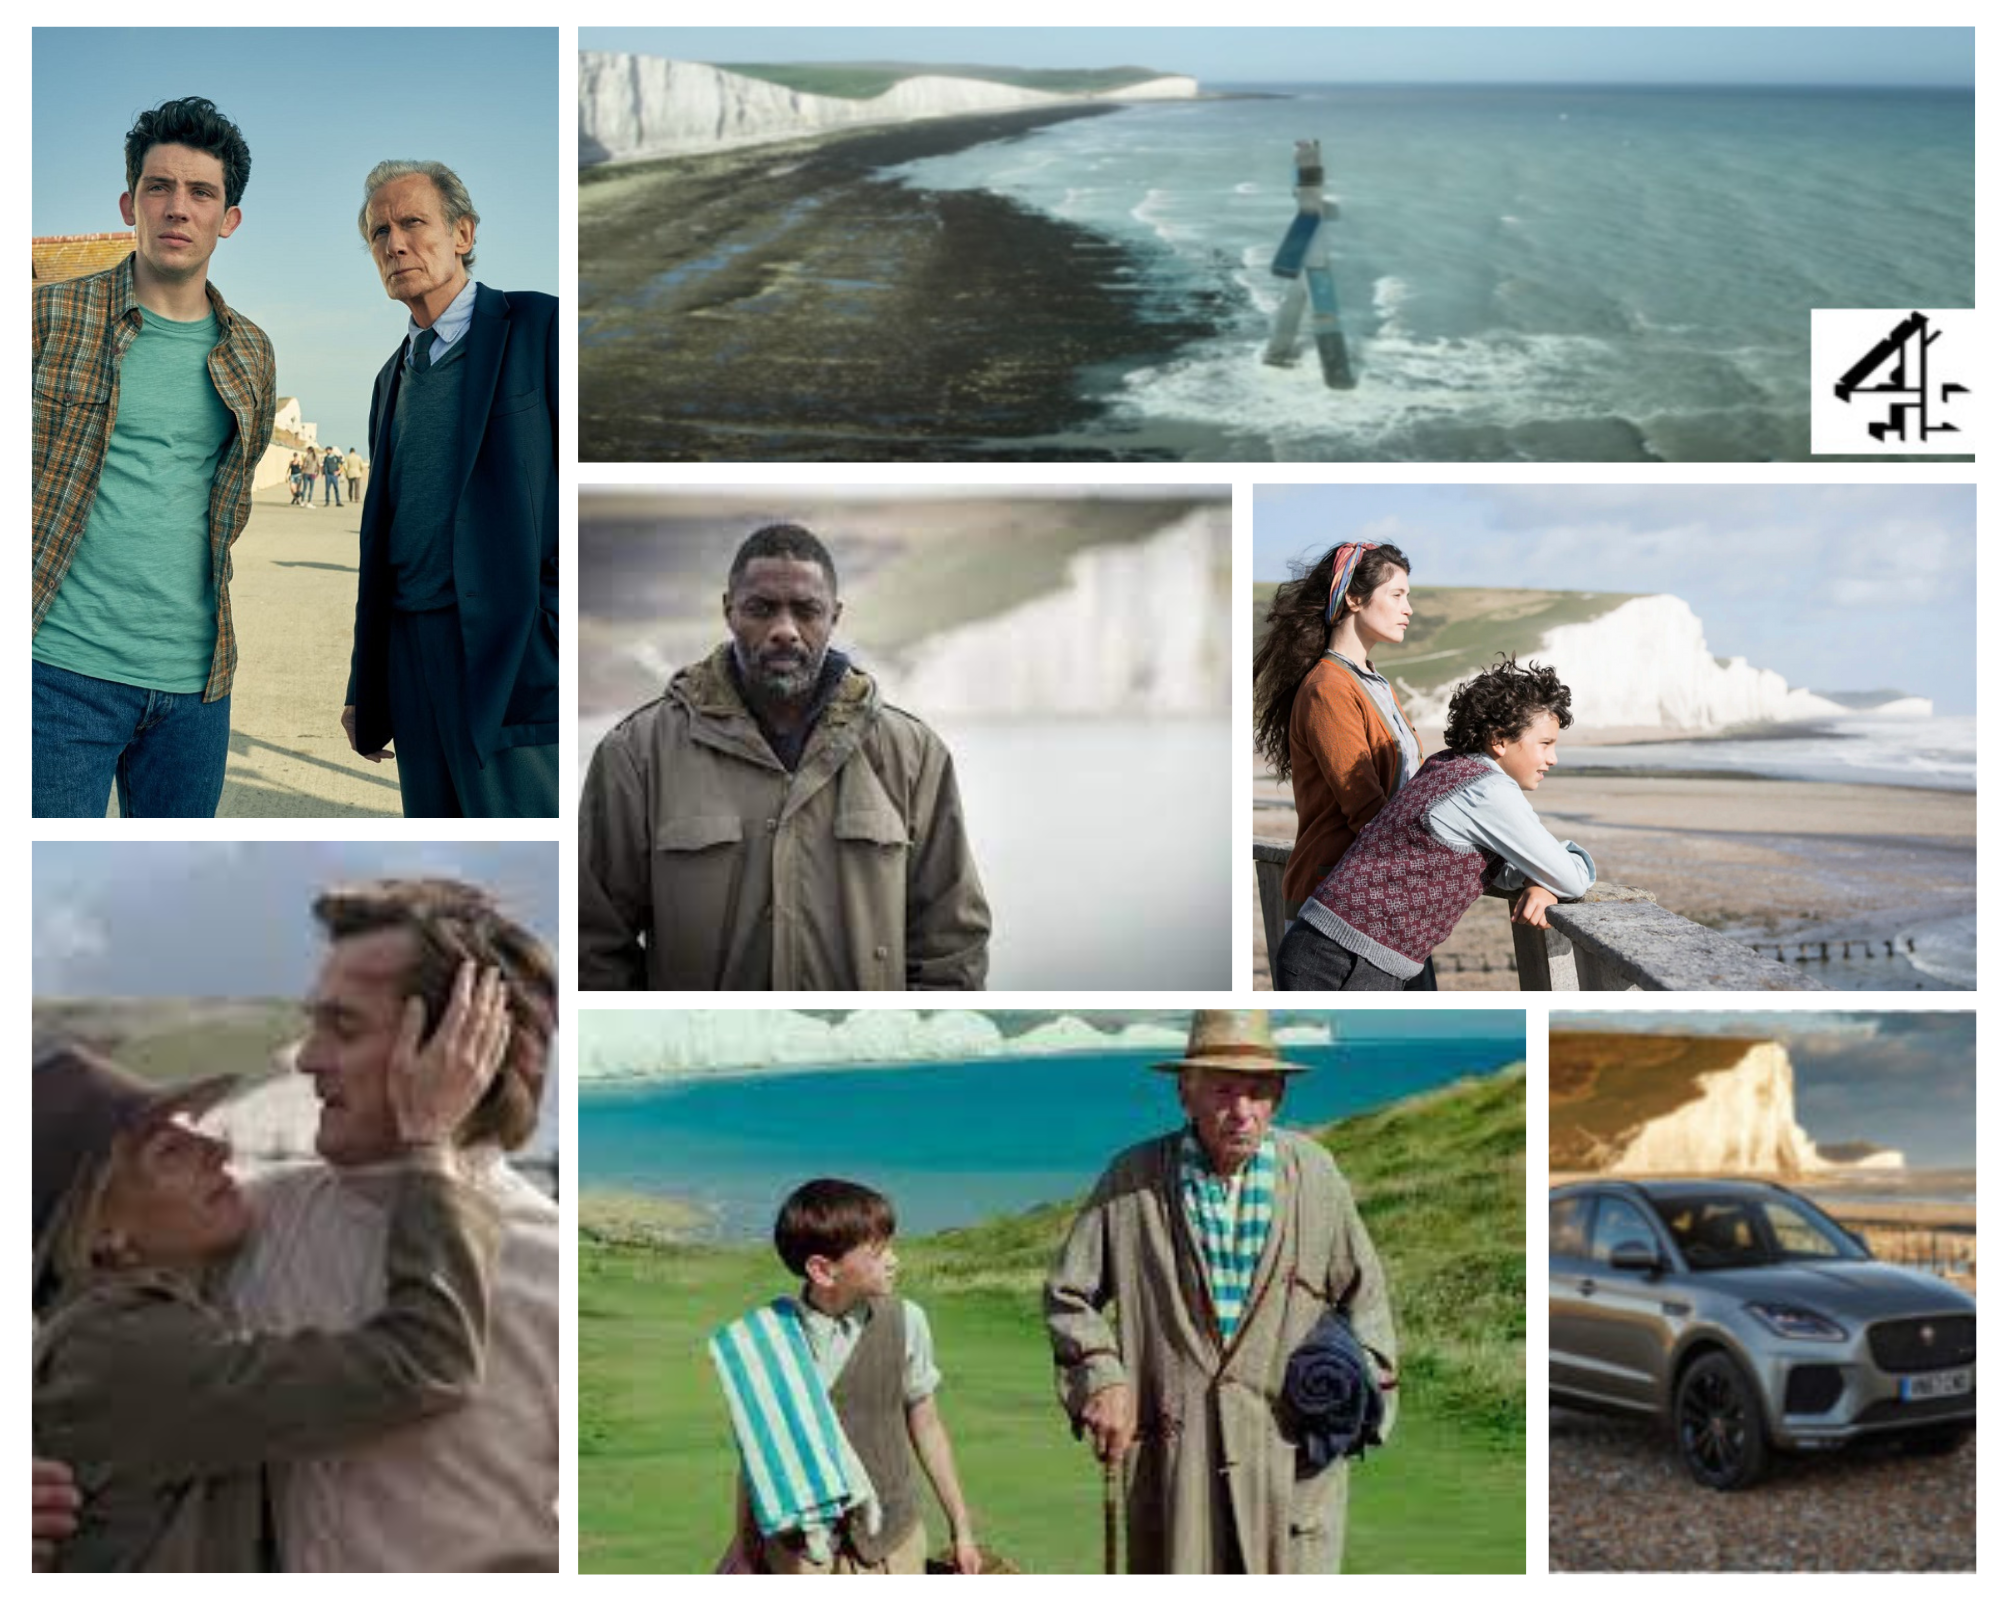 photos of films that have used Seaford as film location. Two men standing together, seven sisters cliffs, Idris Elba.